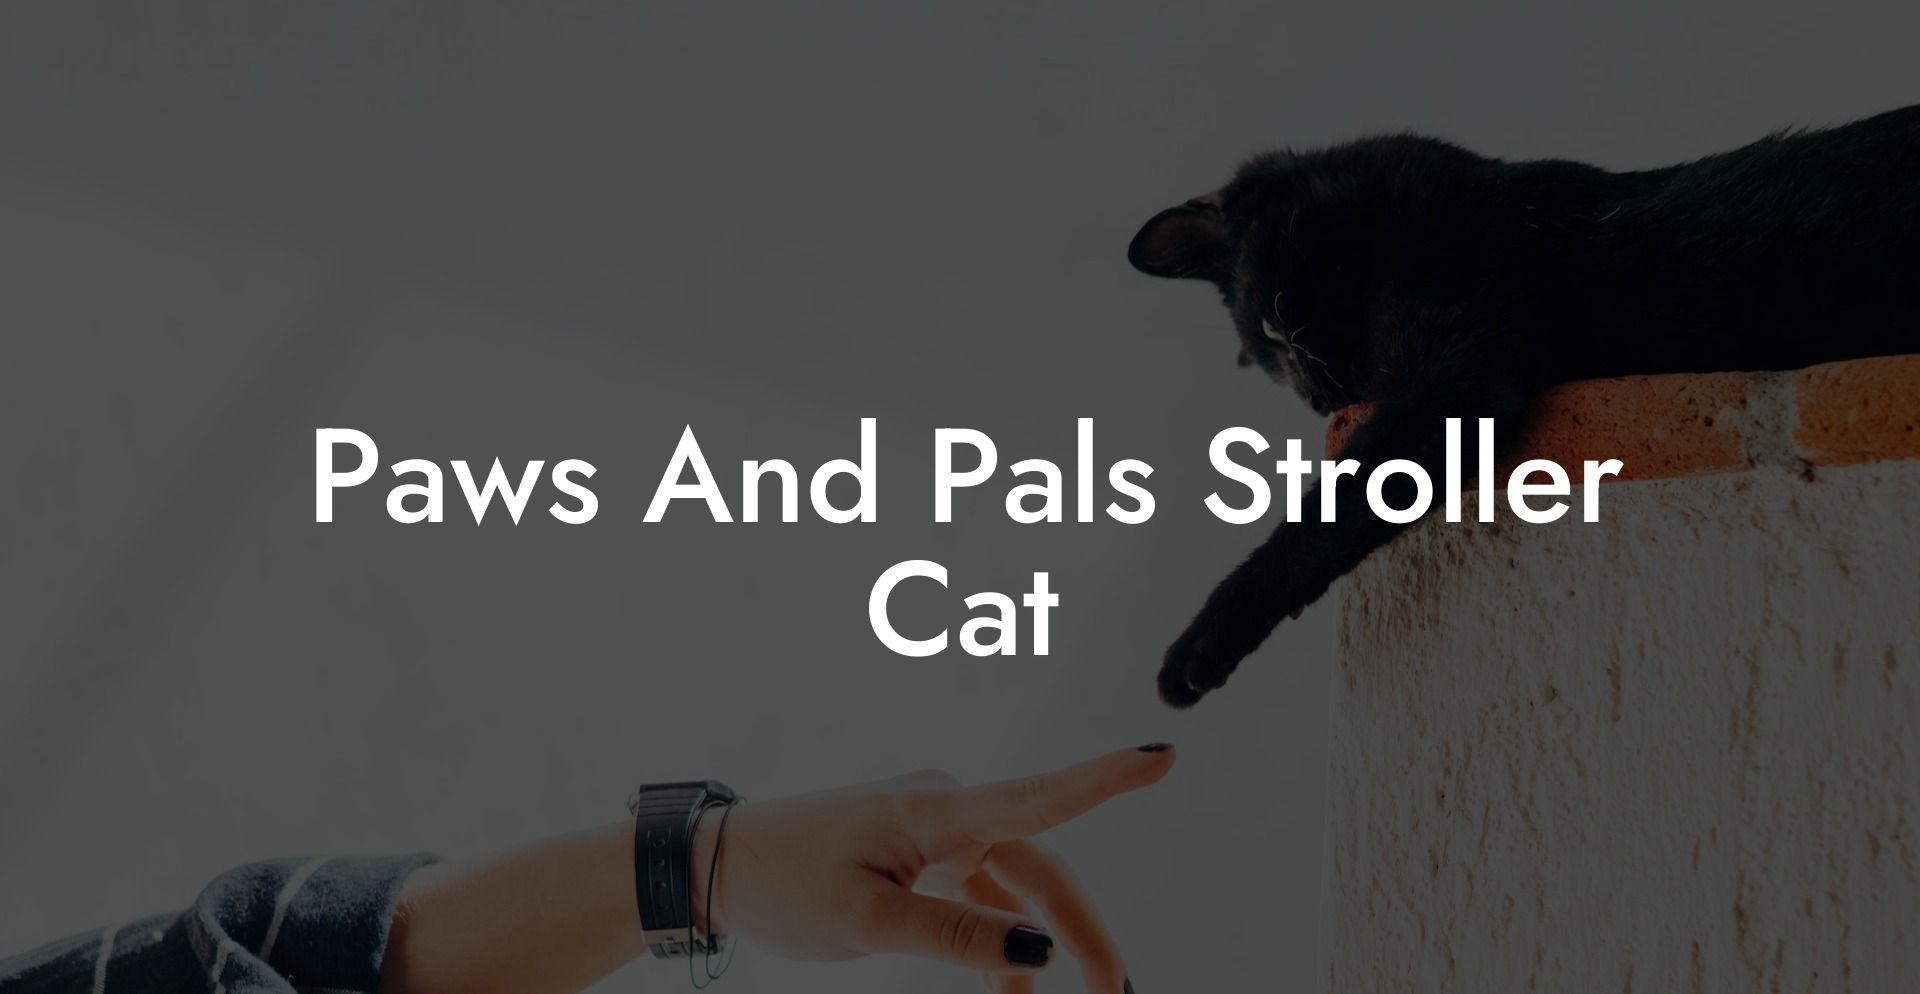 Paws And Pals Stroller Cat